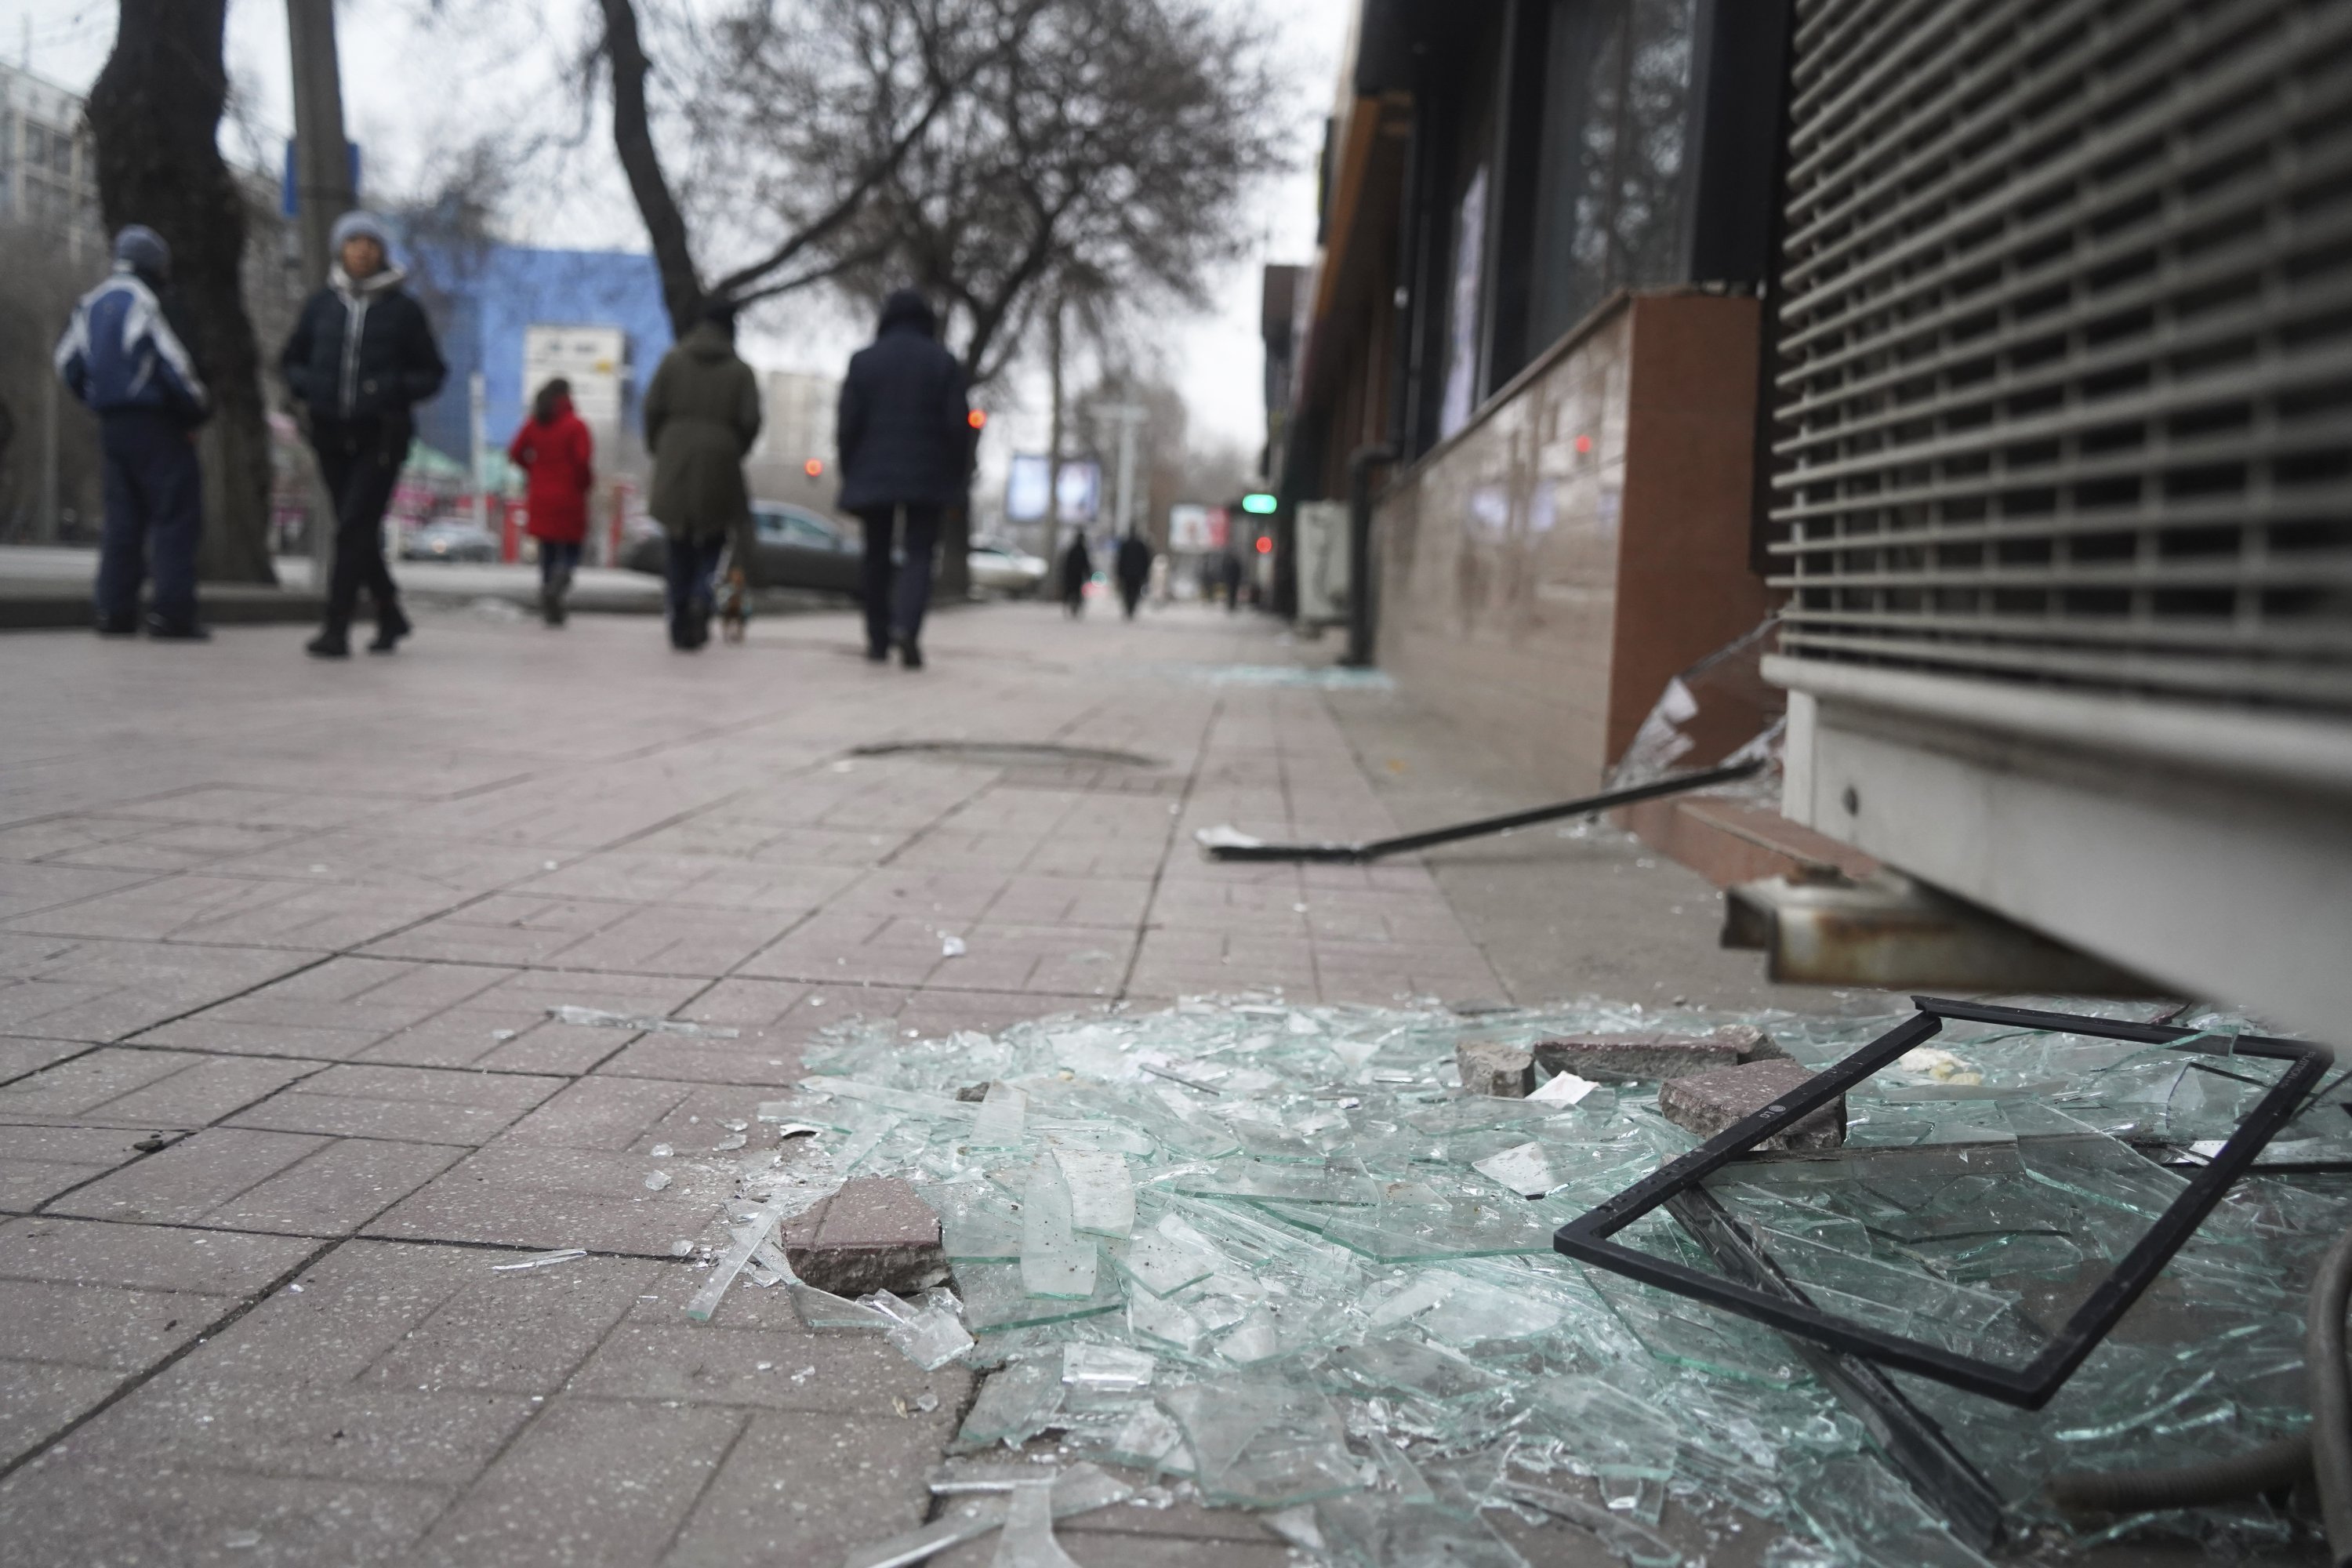 People walk past a shop with windows broken during clashes in Almaty, Kazakhstan, Jan. 10, 2022. (AP Photo)